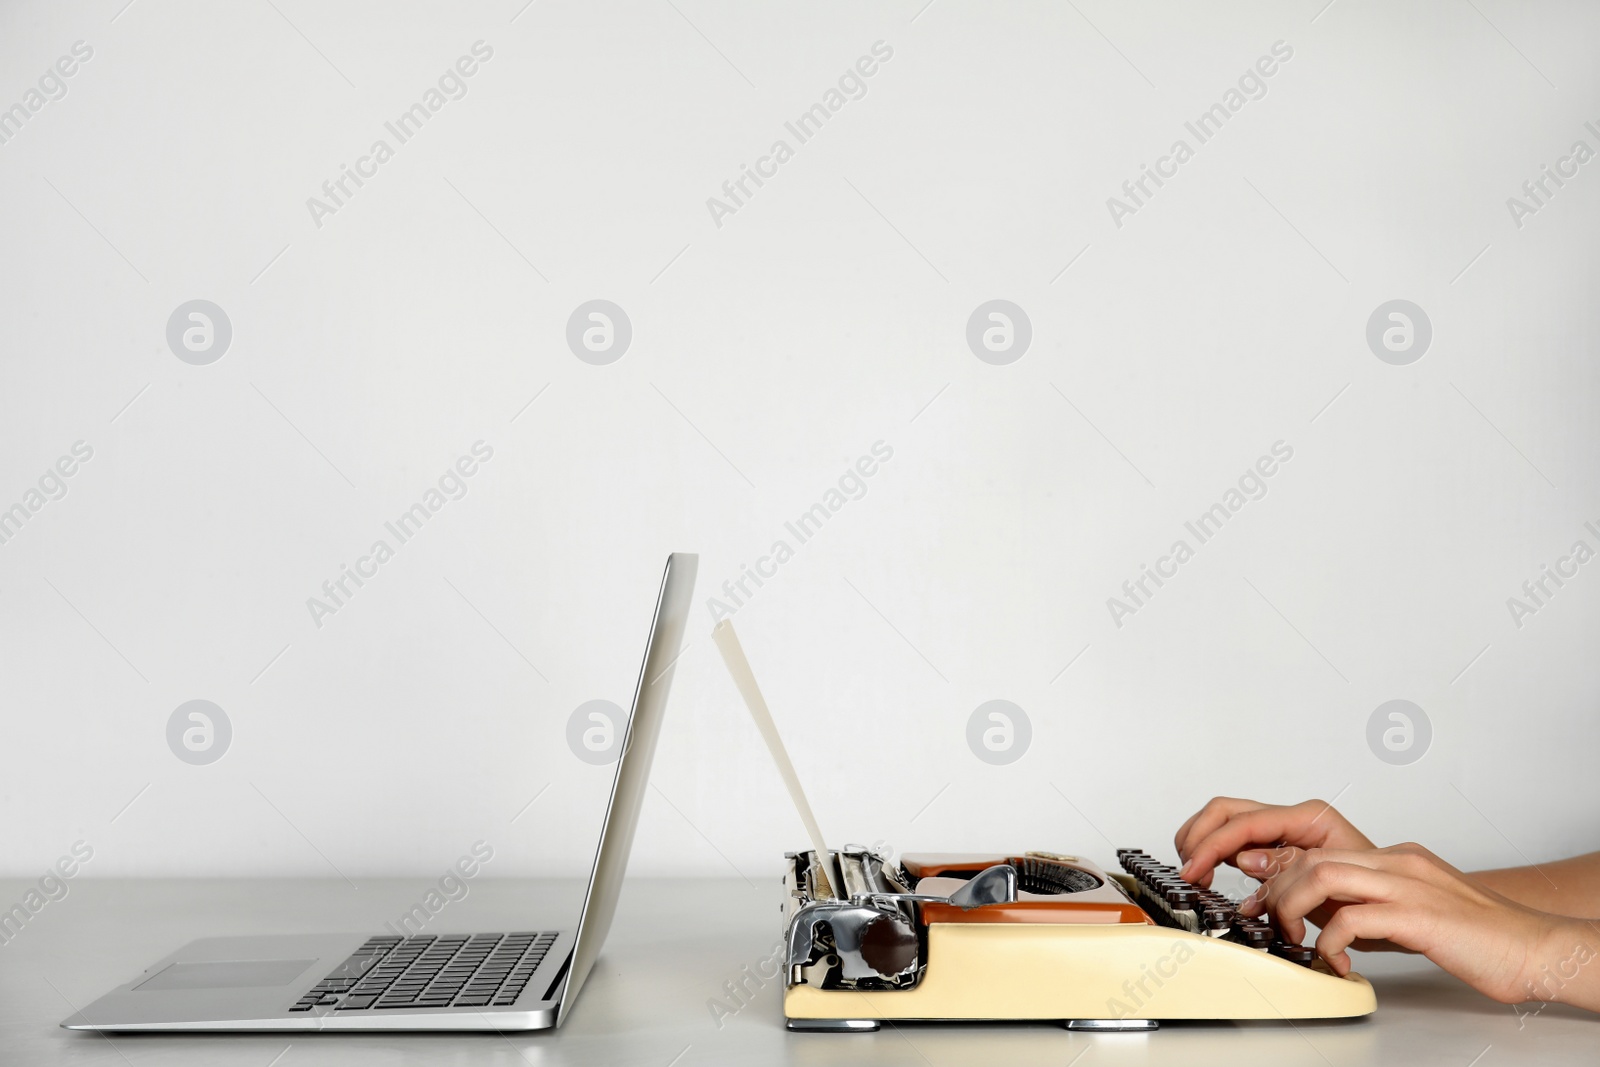 Photo of Woman using old typewriter near laptop at table against light background, closeup with space for text. Concept of technology progress